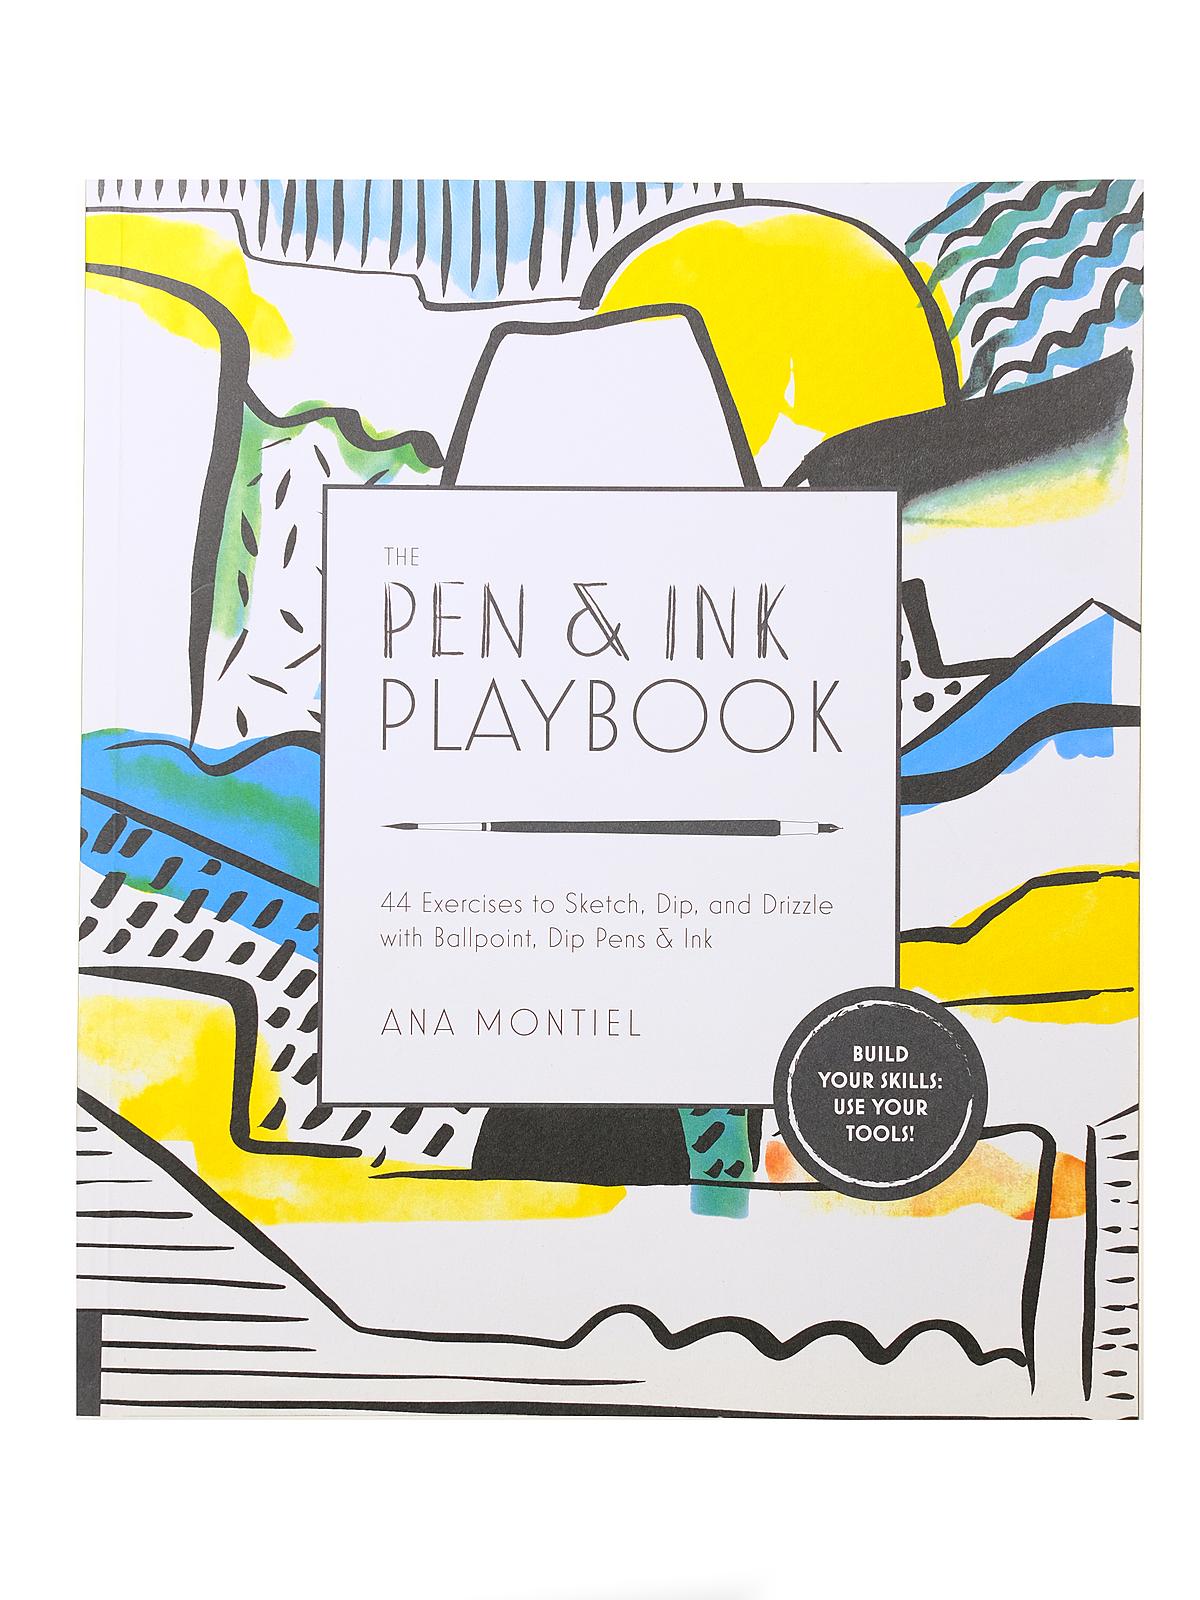 The Pen & Ink Playbook Each